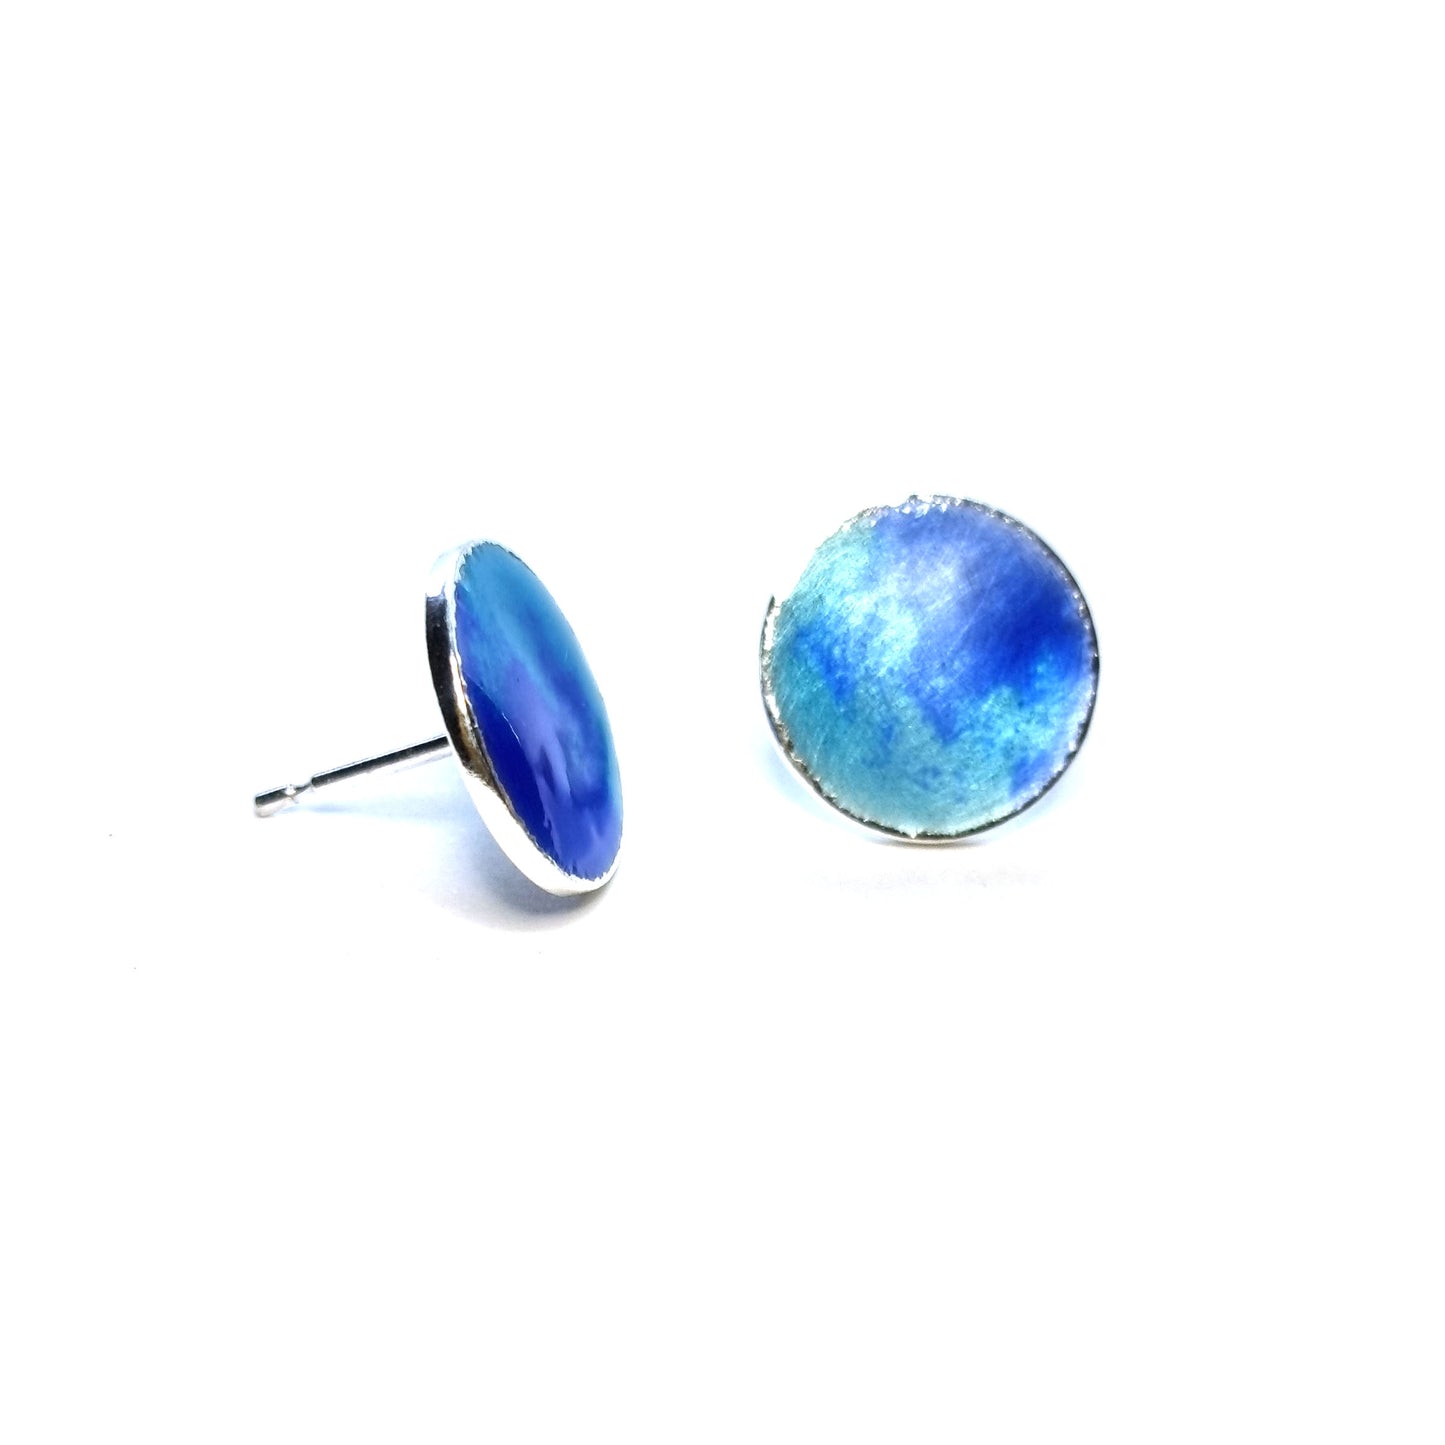 Round silver stud earrings with a mix of blue enamels.